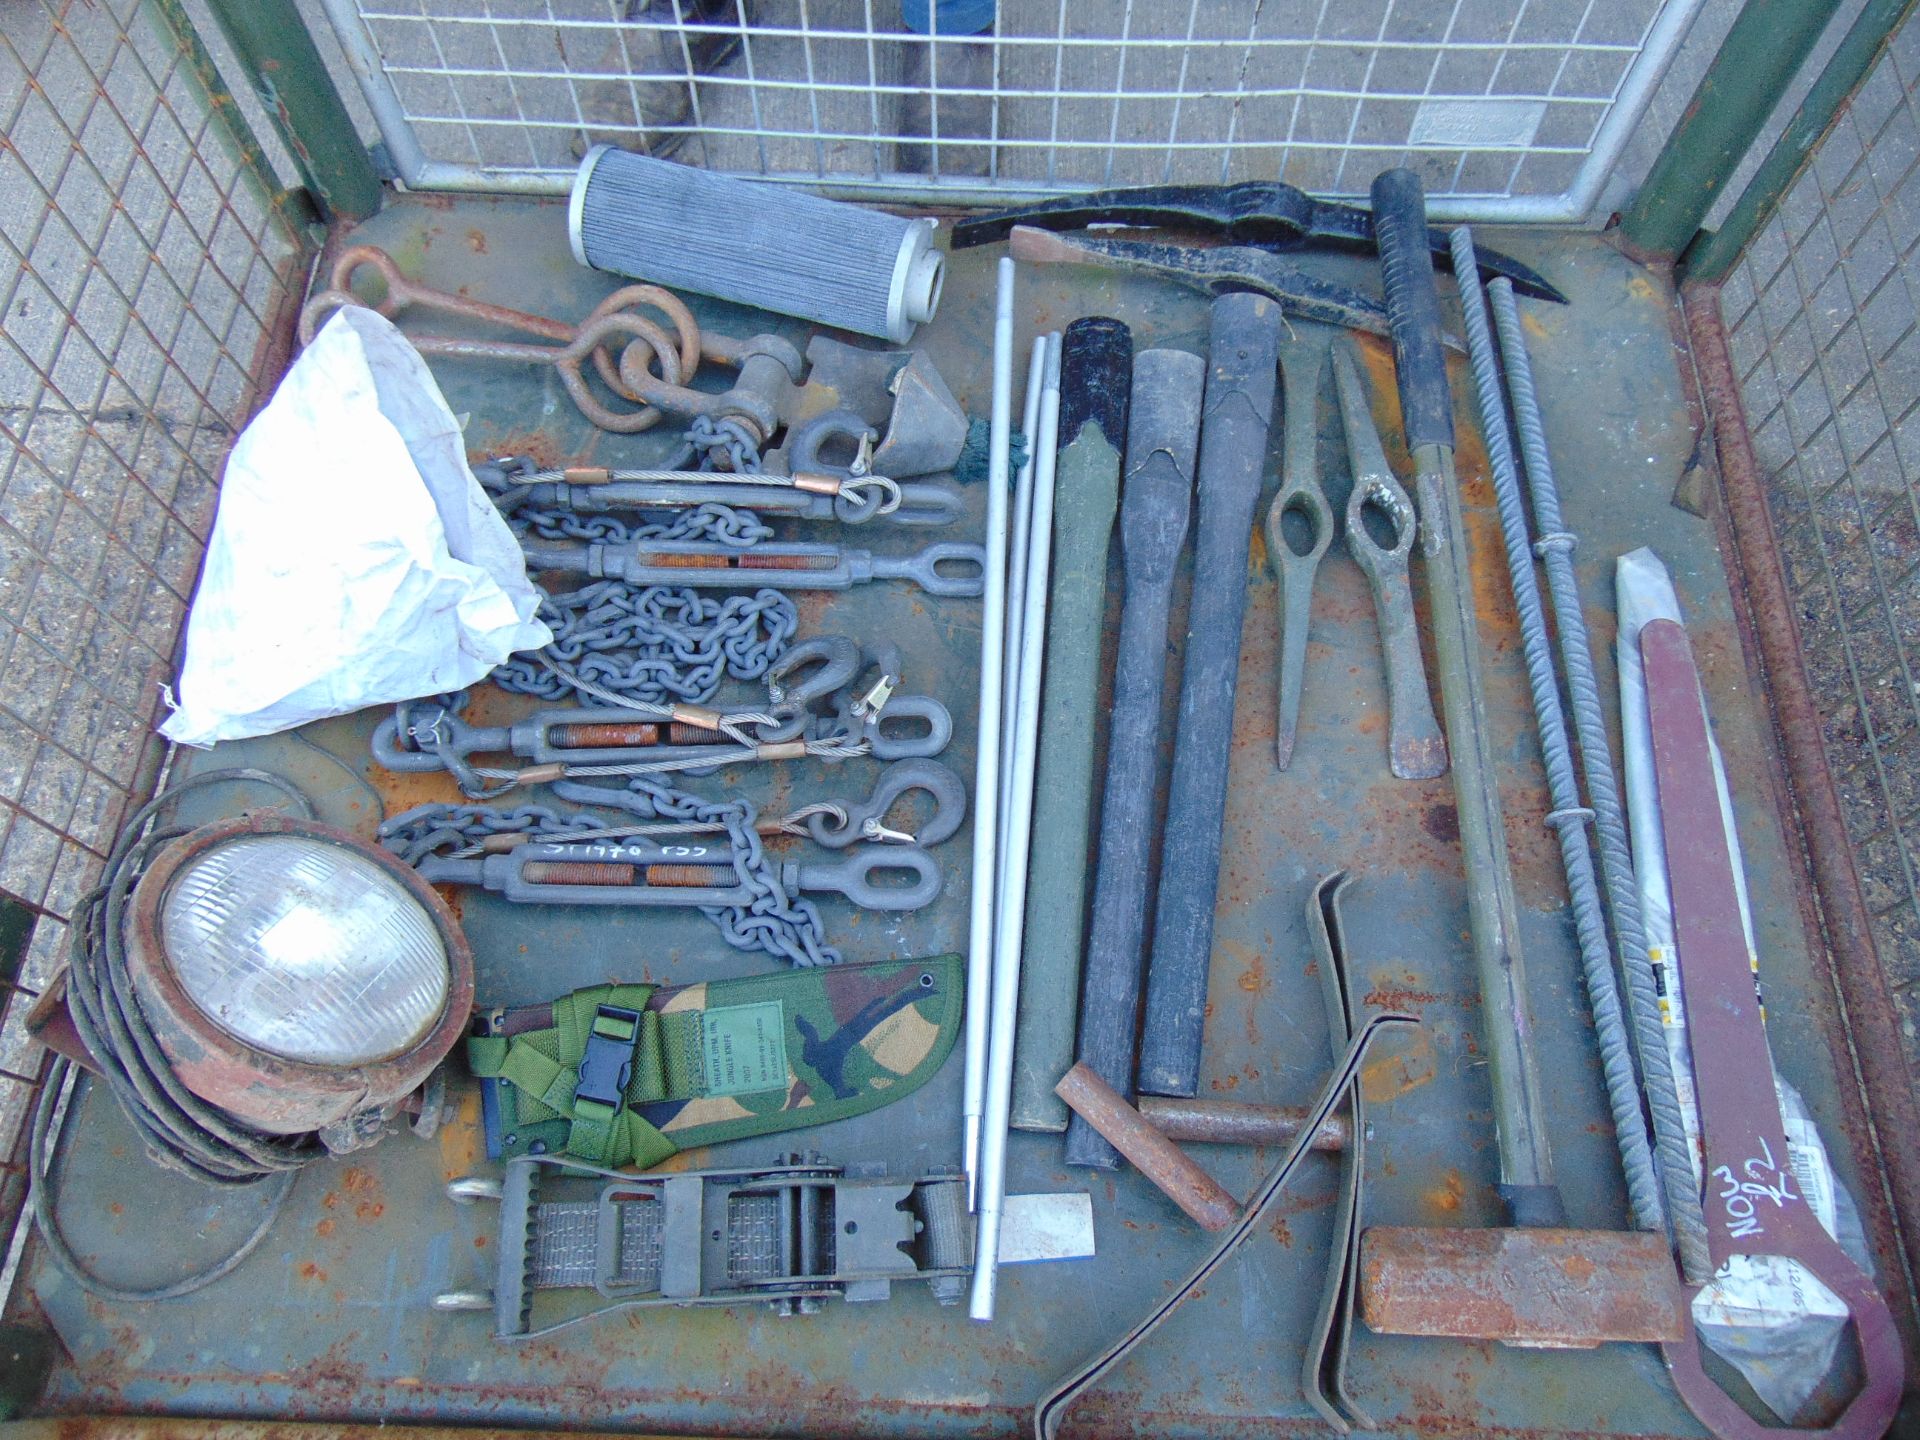 1 x Stillage Tools, Load Binders, Search Light Etc - Image 3 of 5